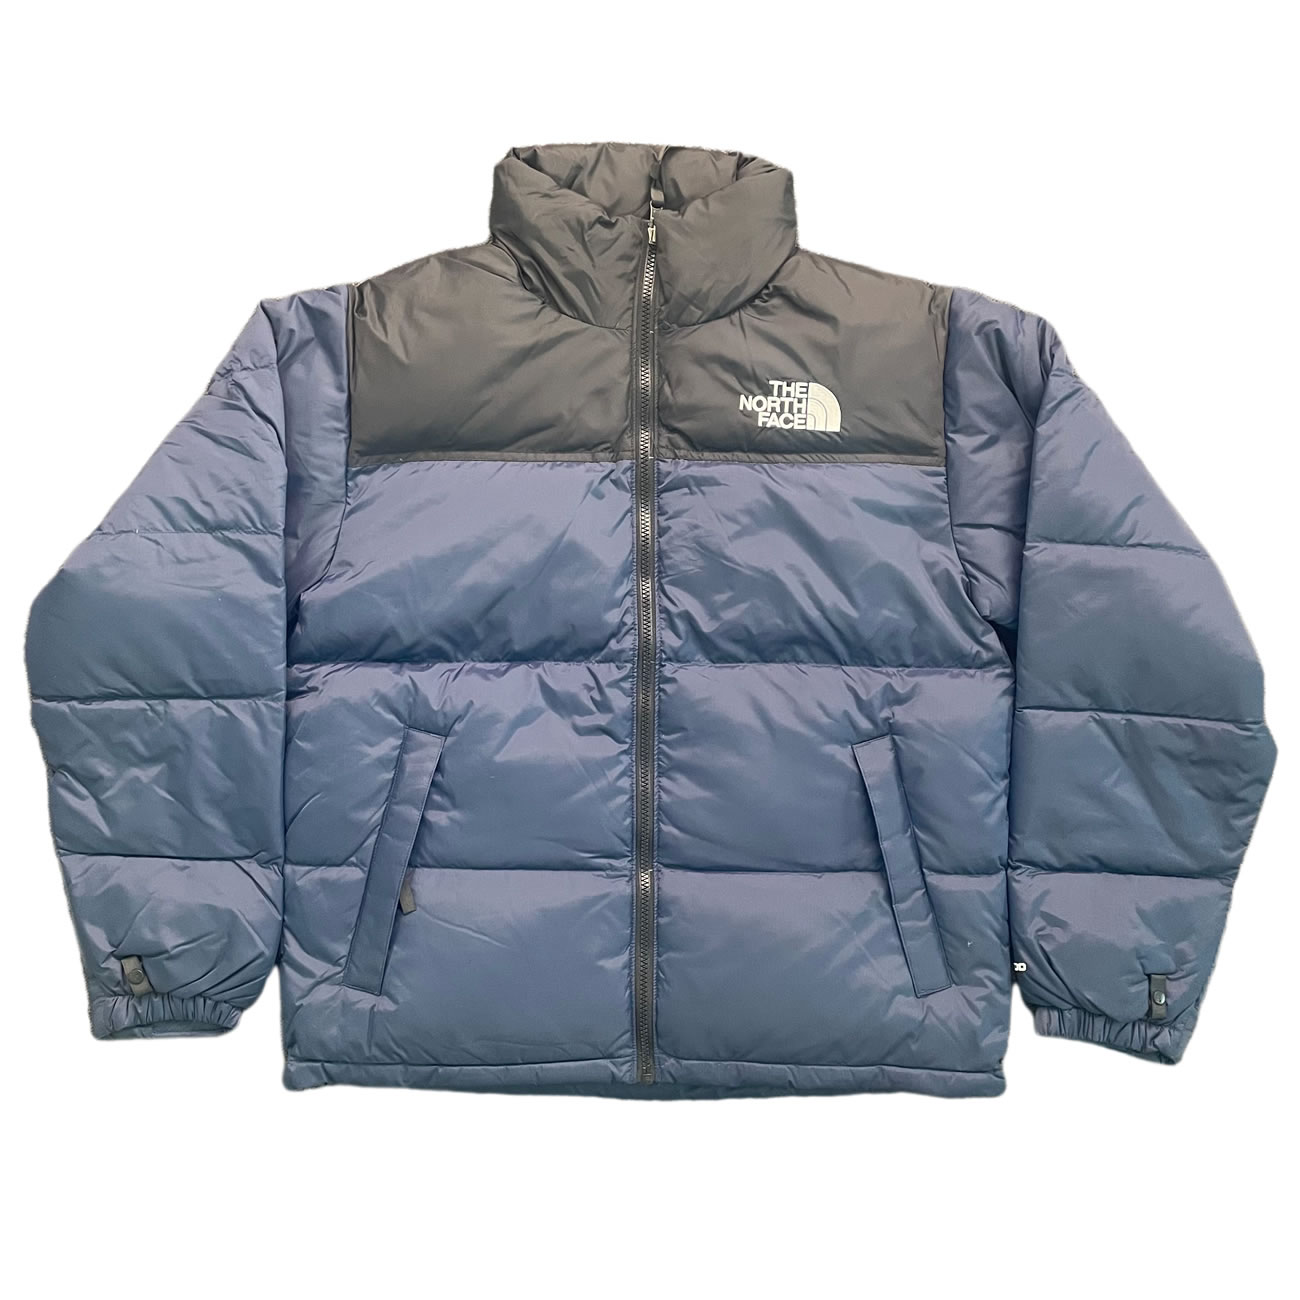 The North Face 1996 Retro Nuptse Packable Jacket Fw21 (16) - newkick.org